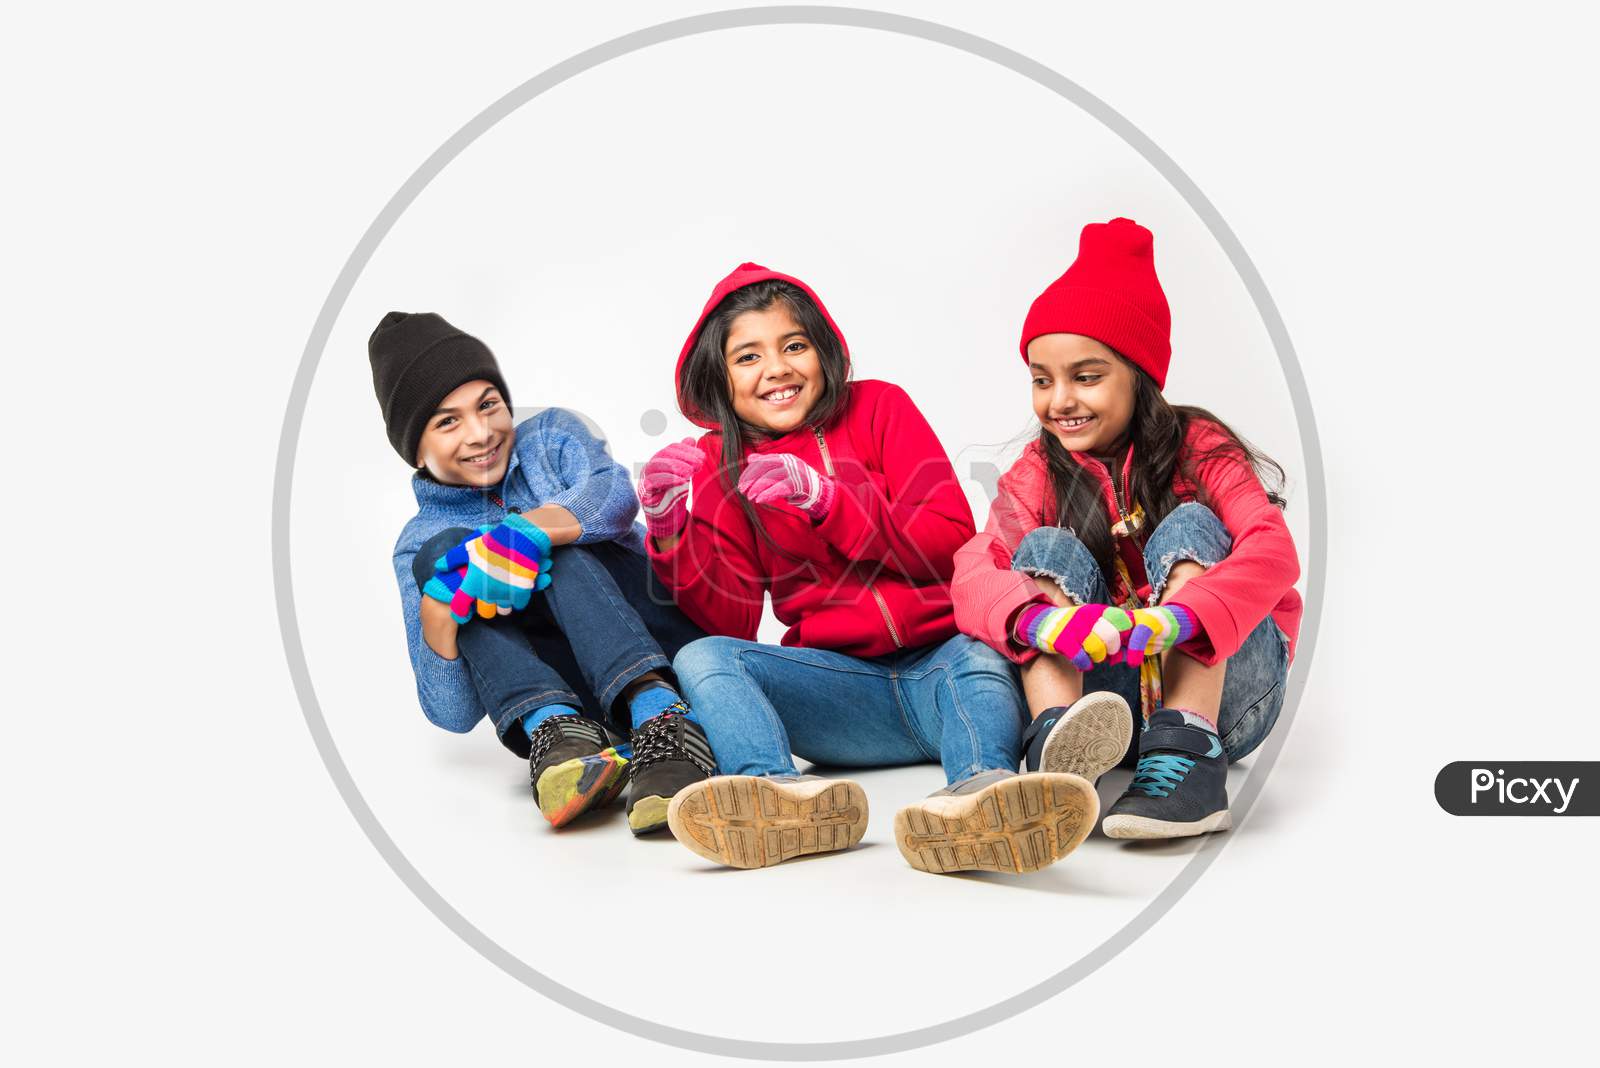 Three Indian /asian kids in winter wear sitting against white background and having fun